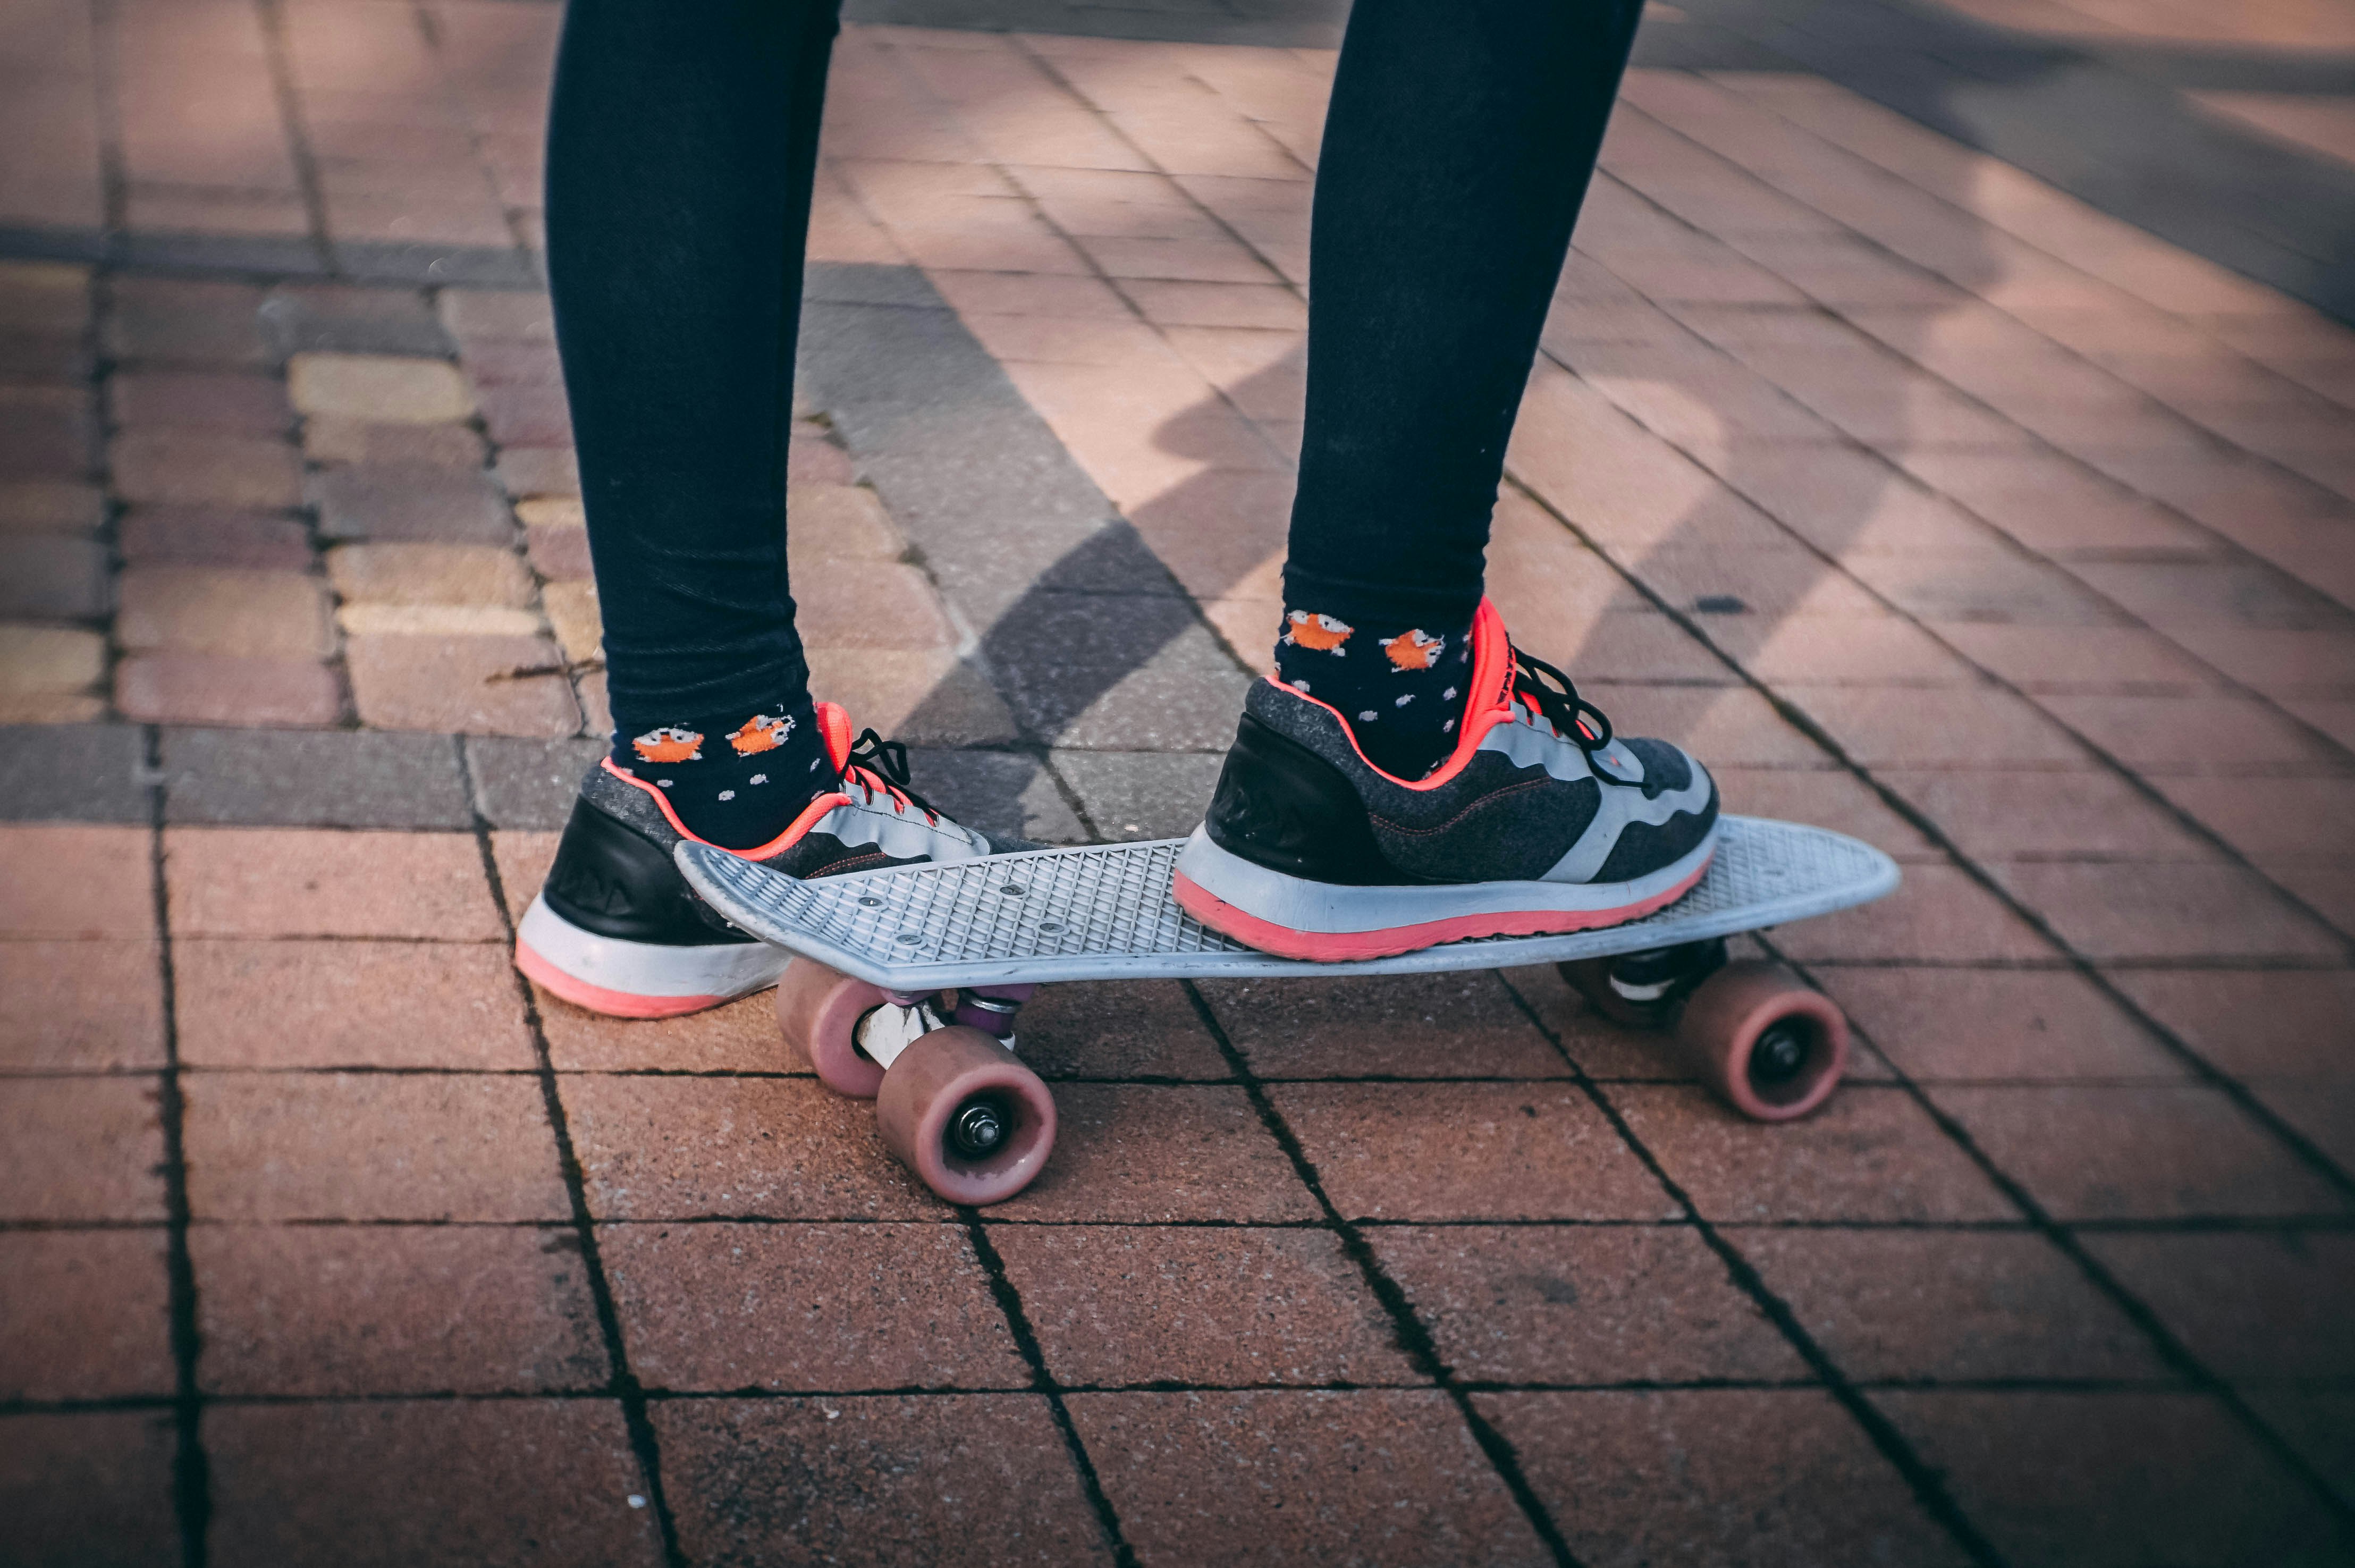 person wearing running shoes using penny board